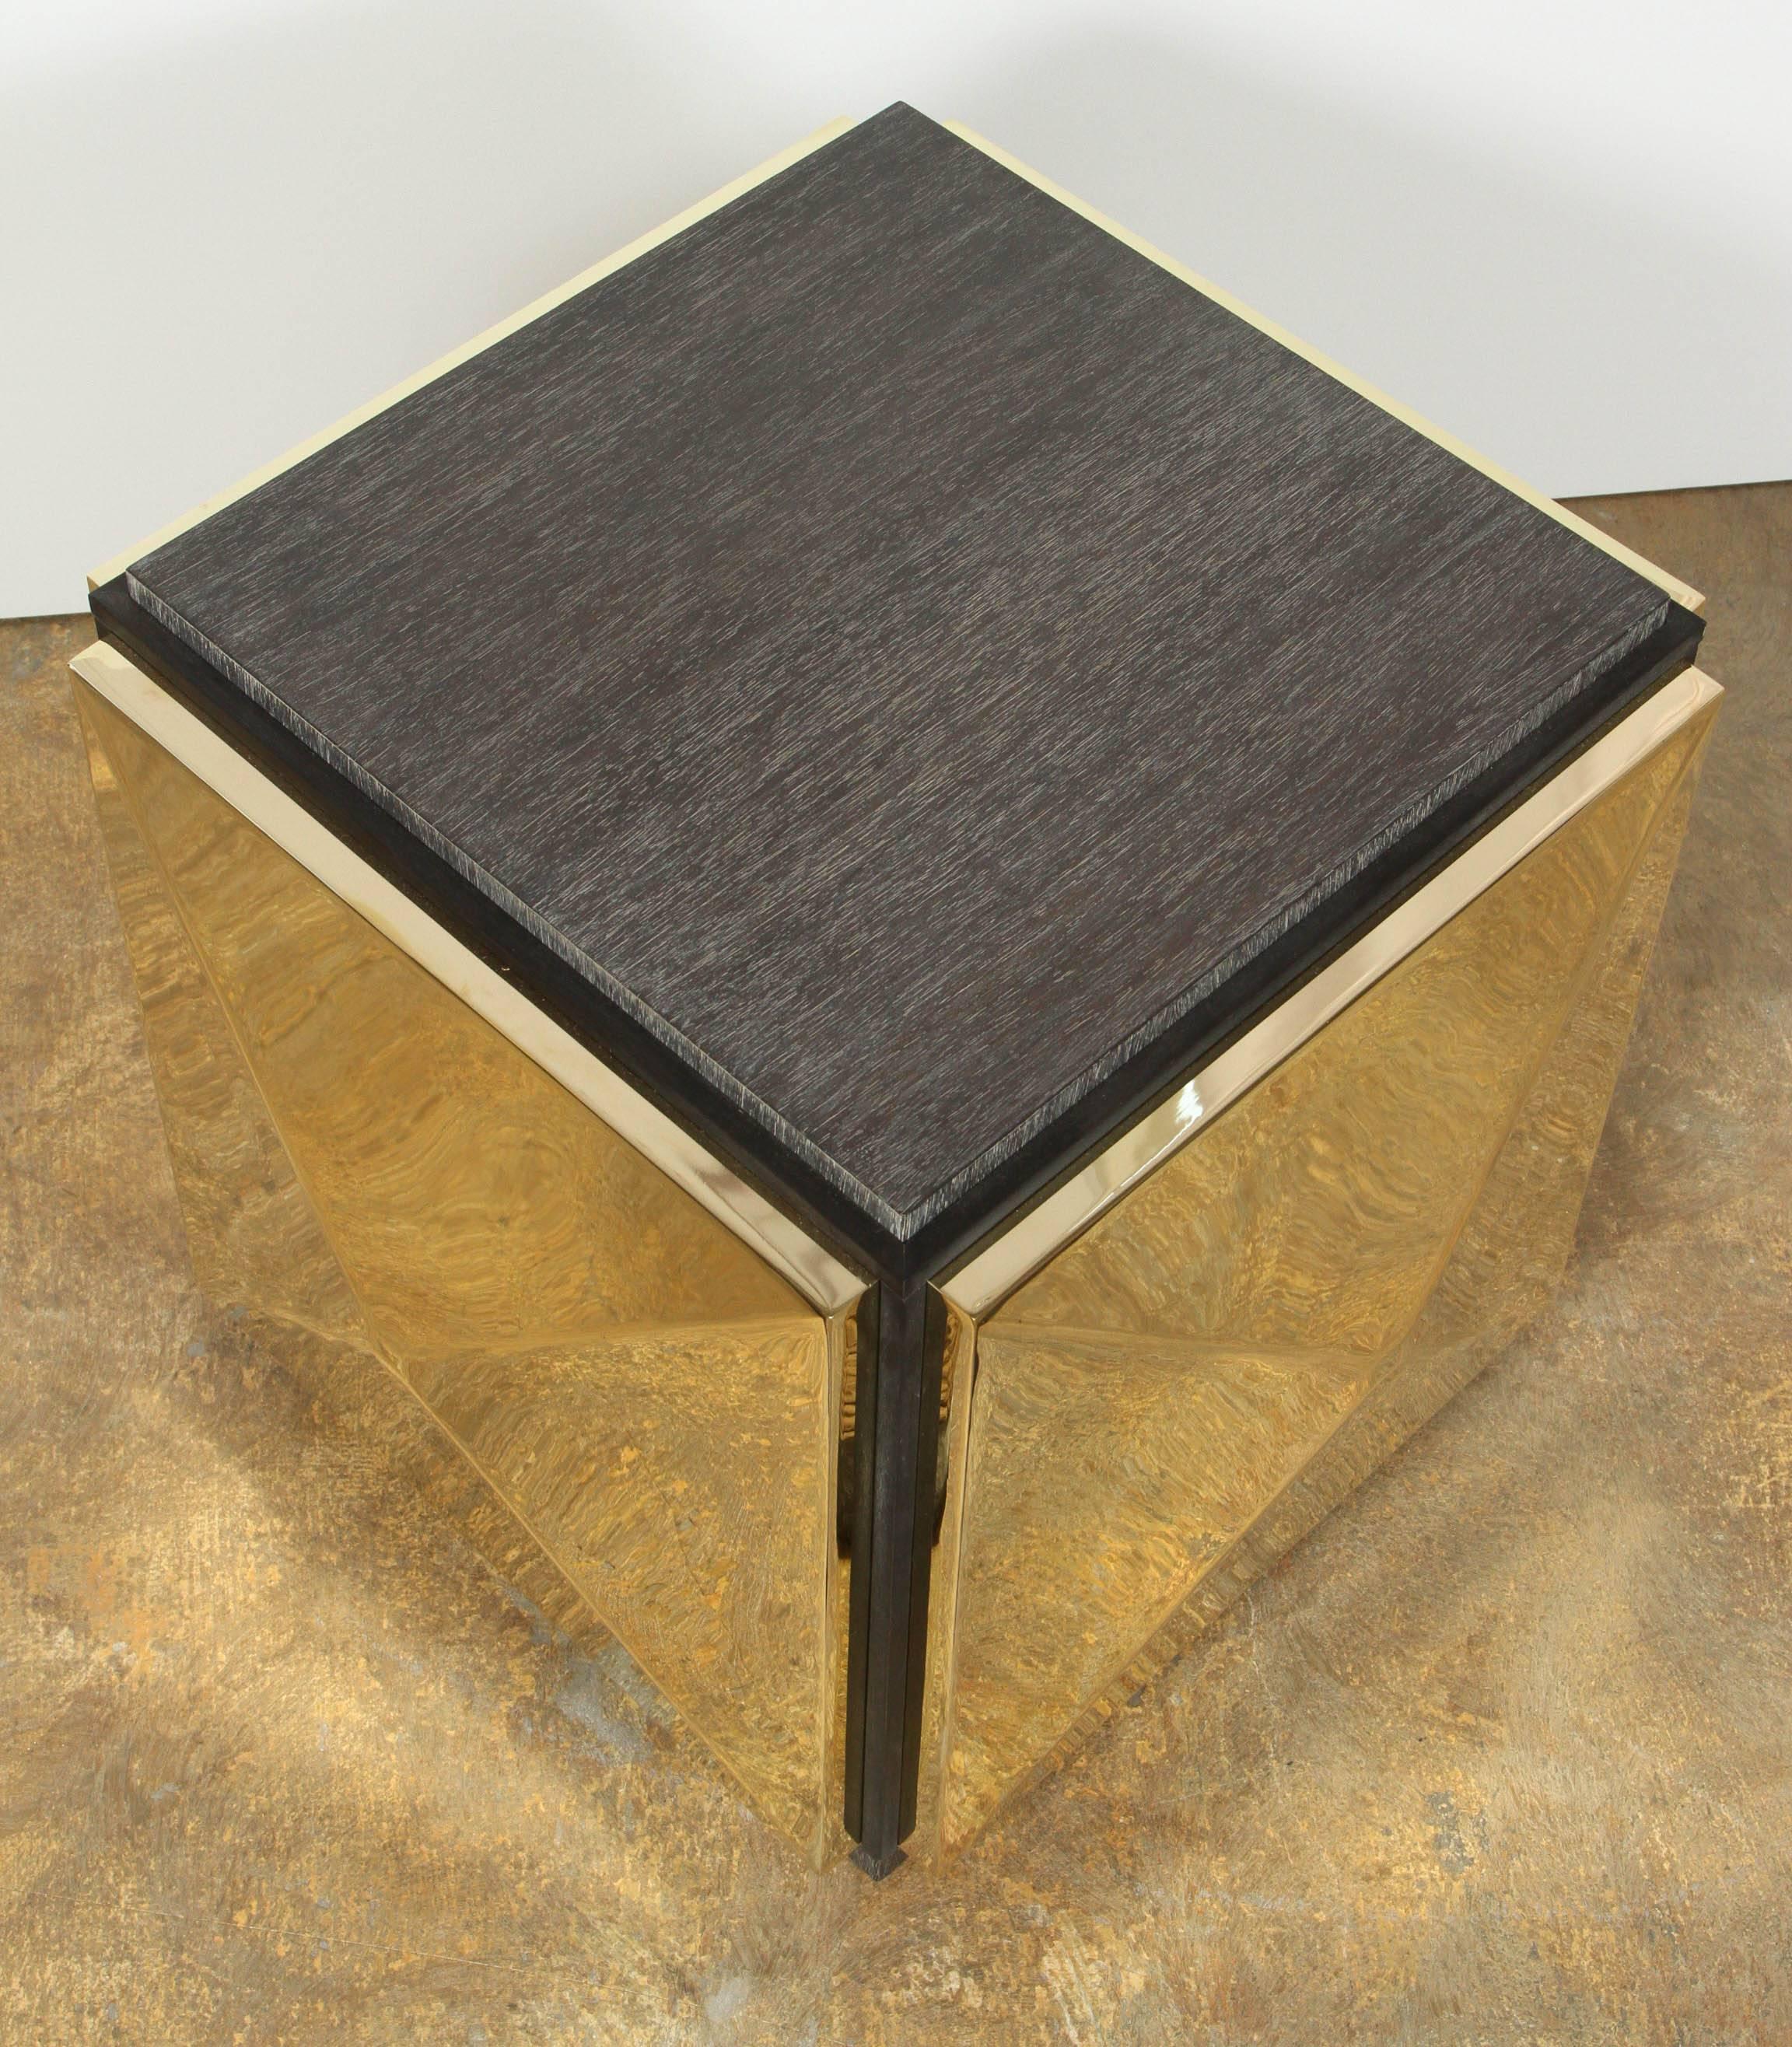 Paul Marra Brass Tile Side Table In Excellent Condition For Sale In Los Angeles, CA